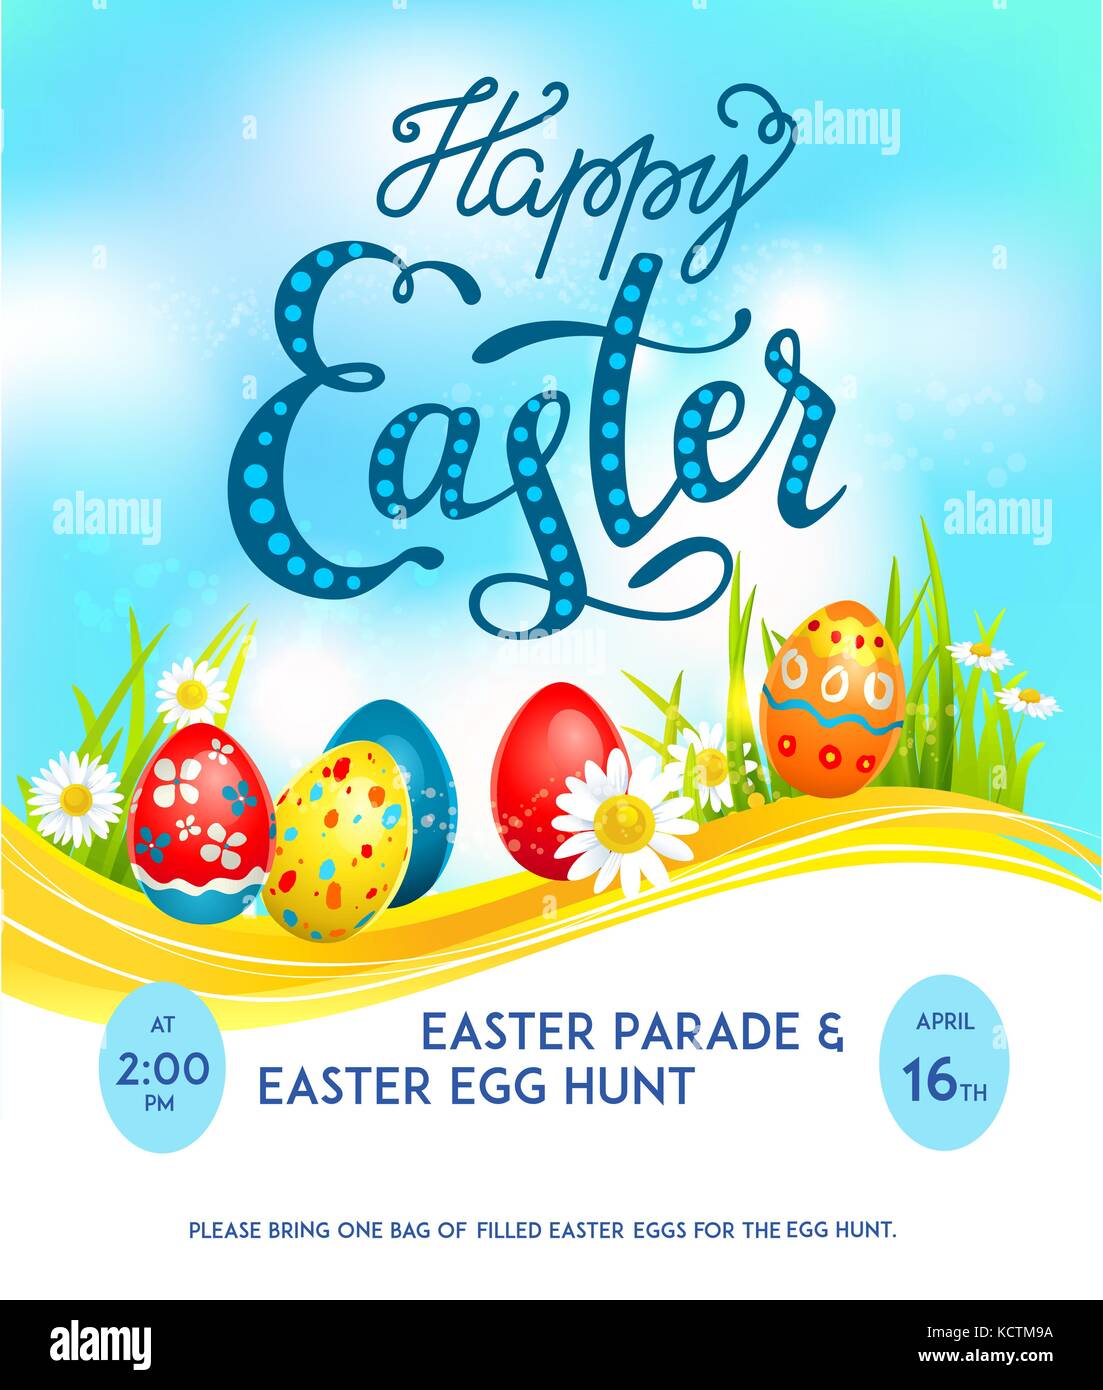 template-easter-poster-stock-vector-image-art-alamy